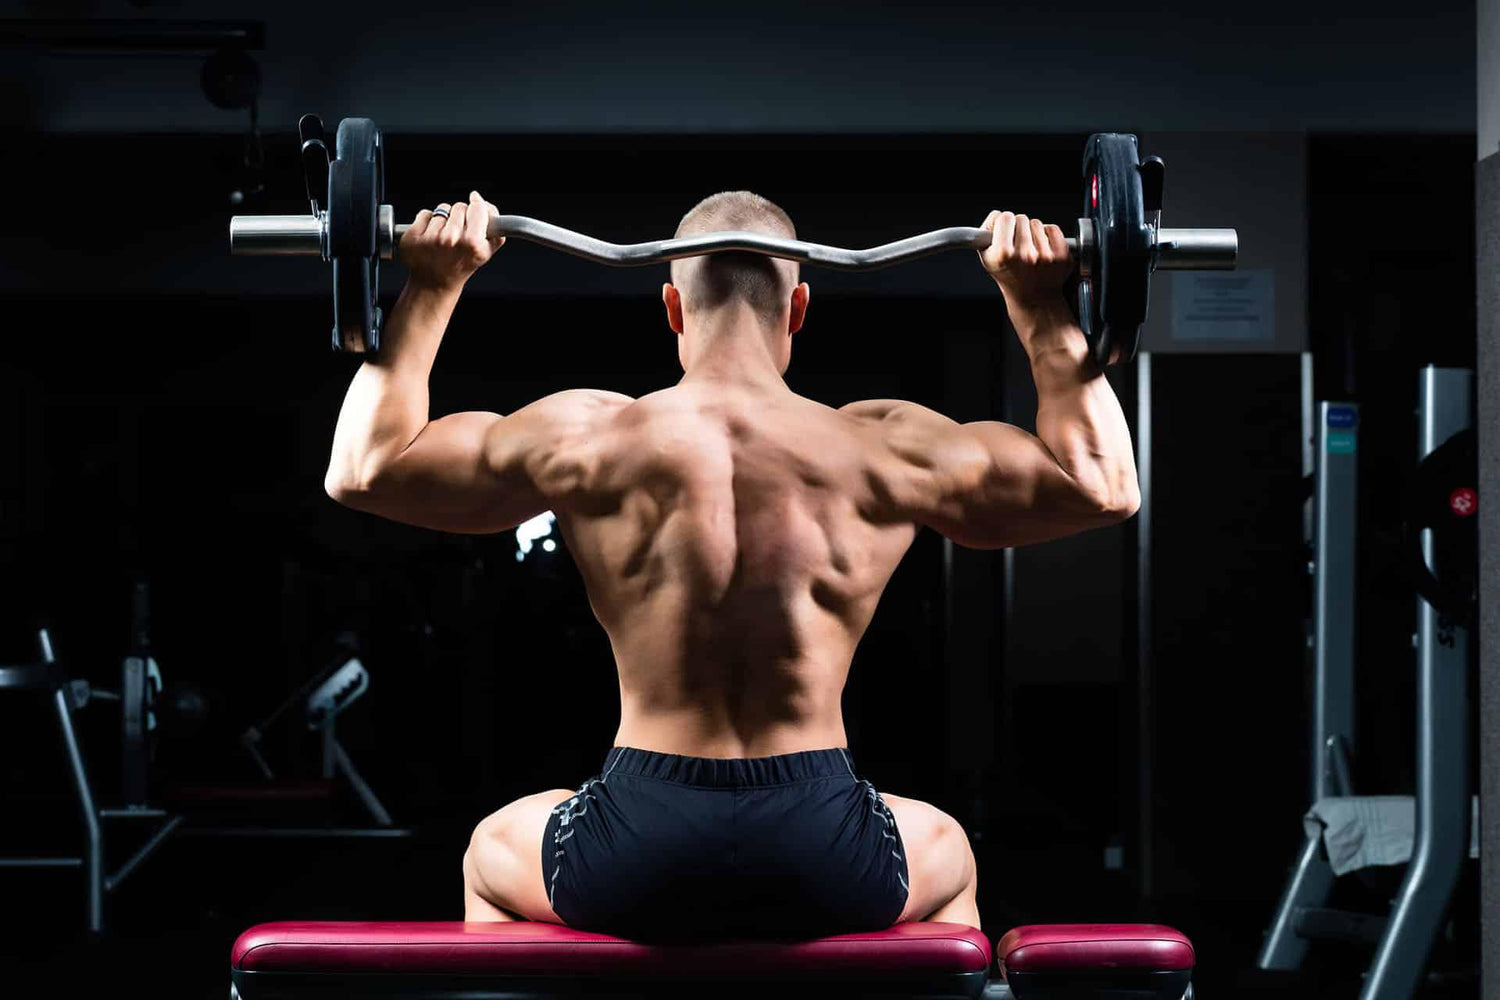 Back view of muscular male performing shoulder press in dimly lit gym